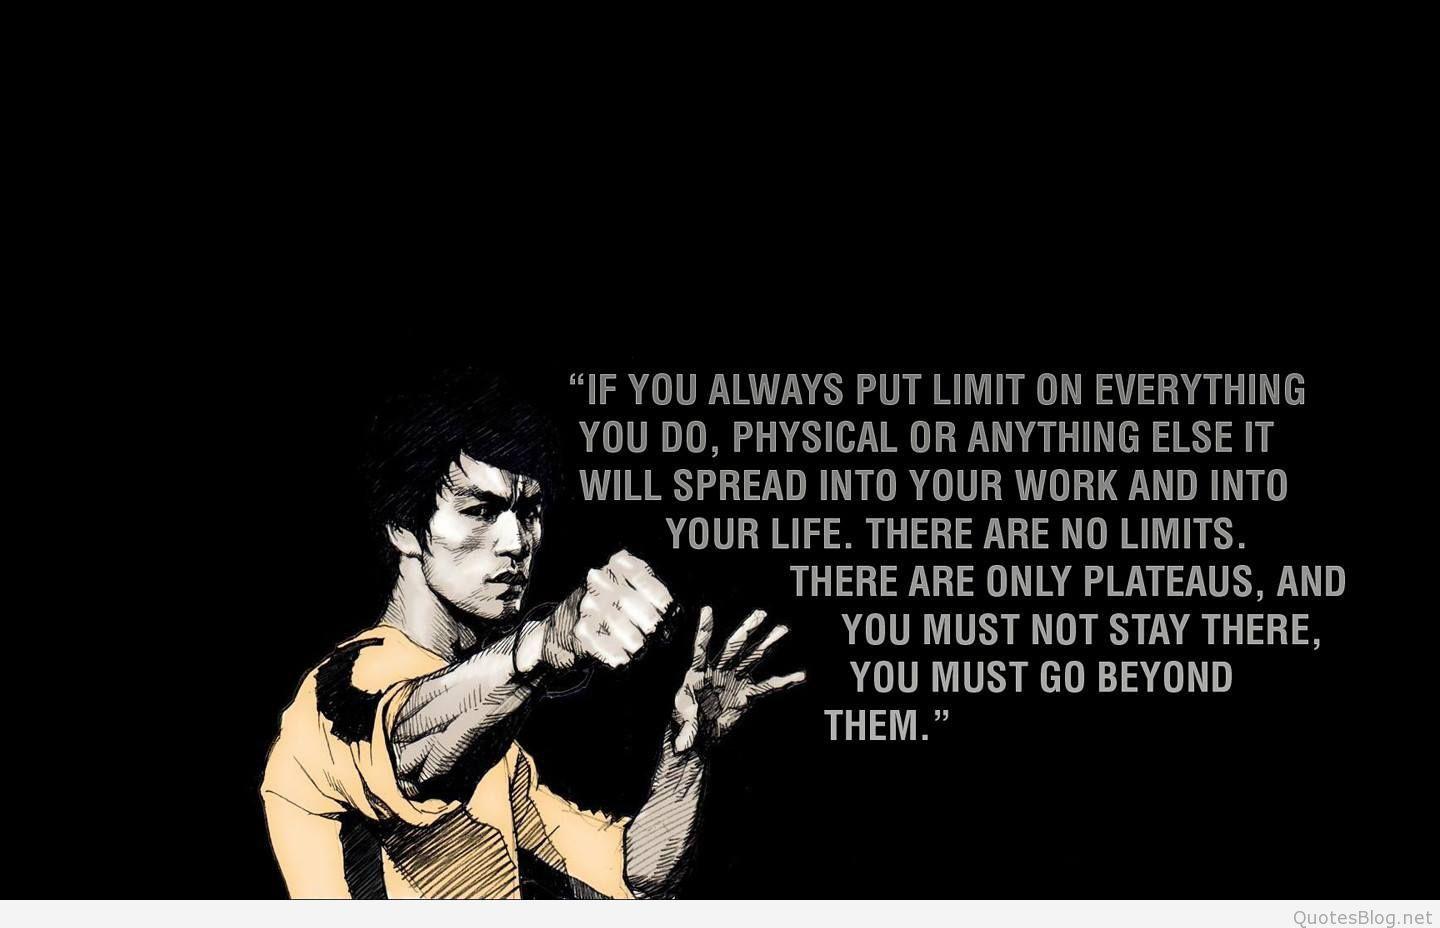 Bruce Lee Quotes About Life Bruce Lee Image Wallpaper With Quotes